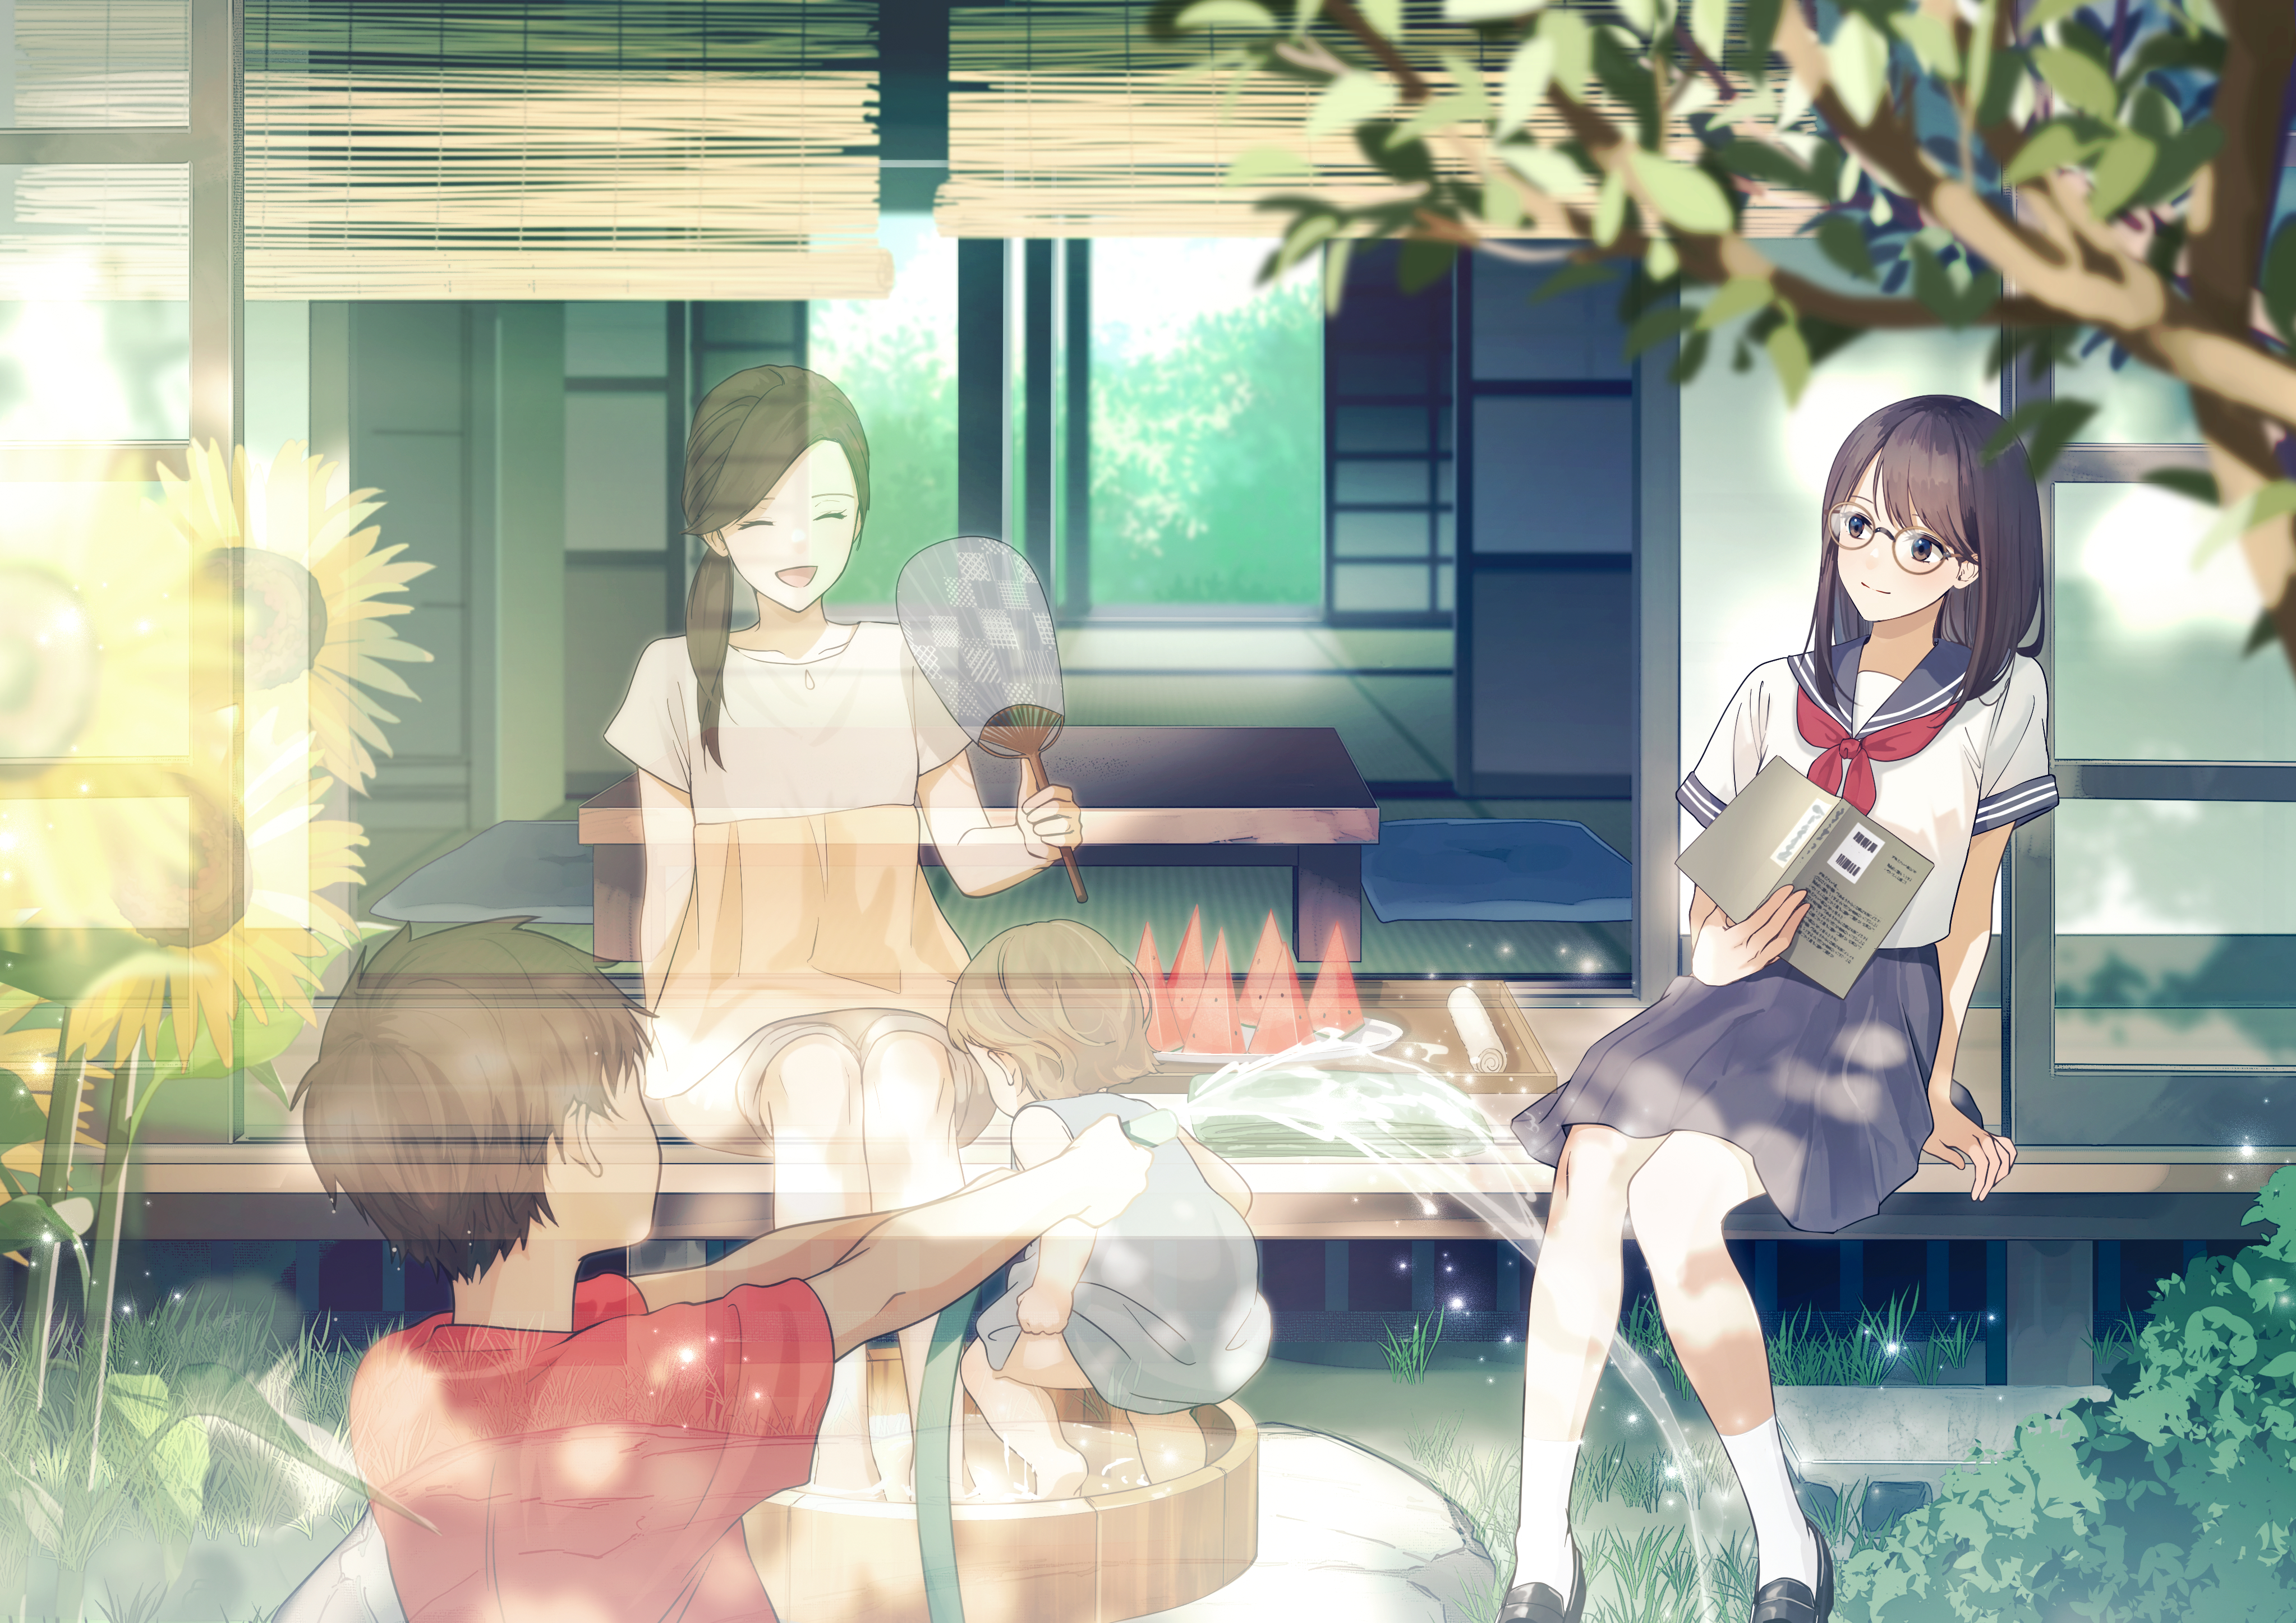 Anime 4093x2894 anime anime girls schoolgirl school uniform transparency anime boys waterhose water sunflowers sunlight sitting leaves smiling glasses books table closed eyes children grass watermelons open mouth